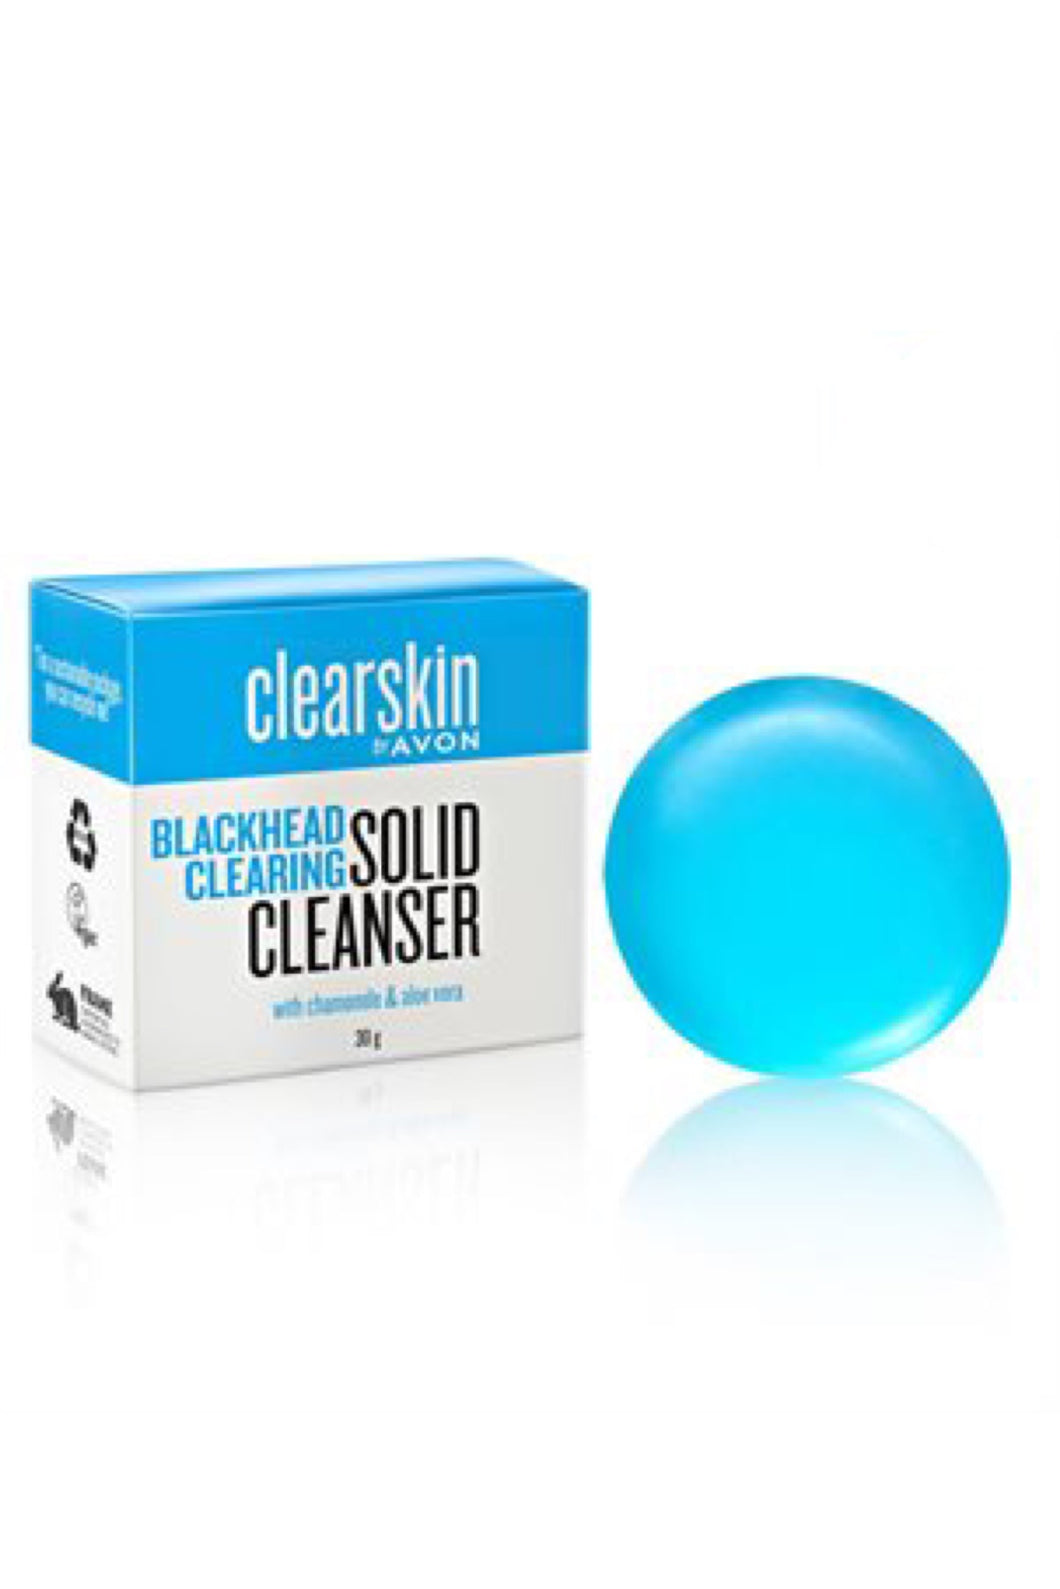 Avon Clearskin Blackhead Clearing Solid Cleanser  30g